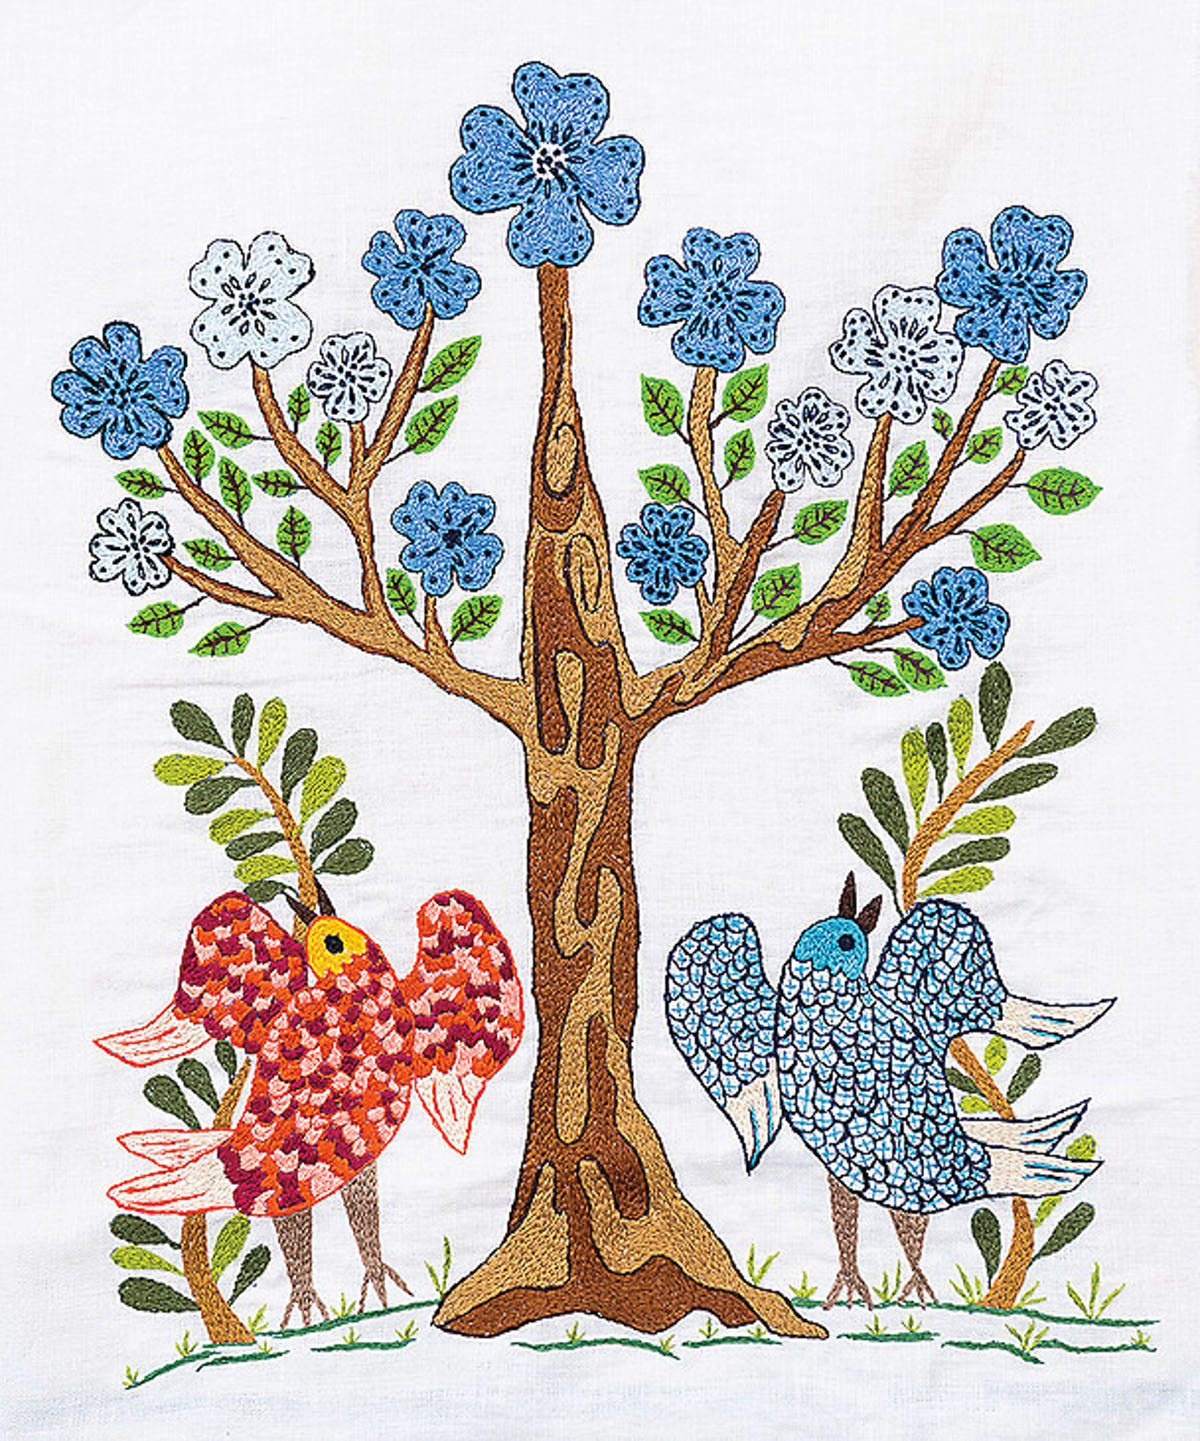 A colorful stitching of blue flowers, green leaves, and a tree atop two birds, one red and one blue